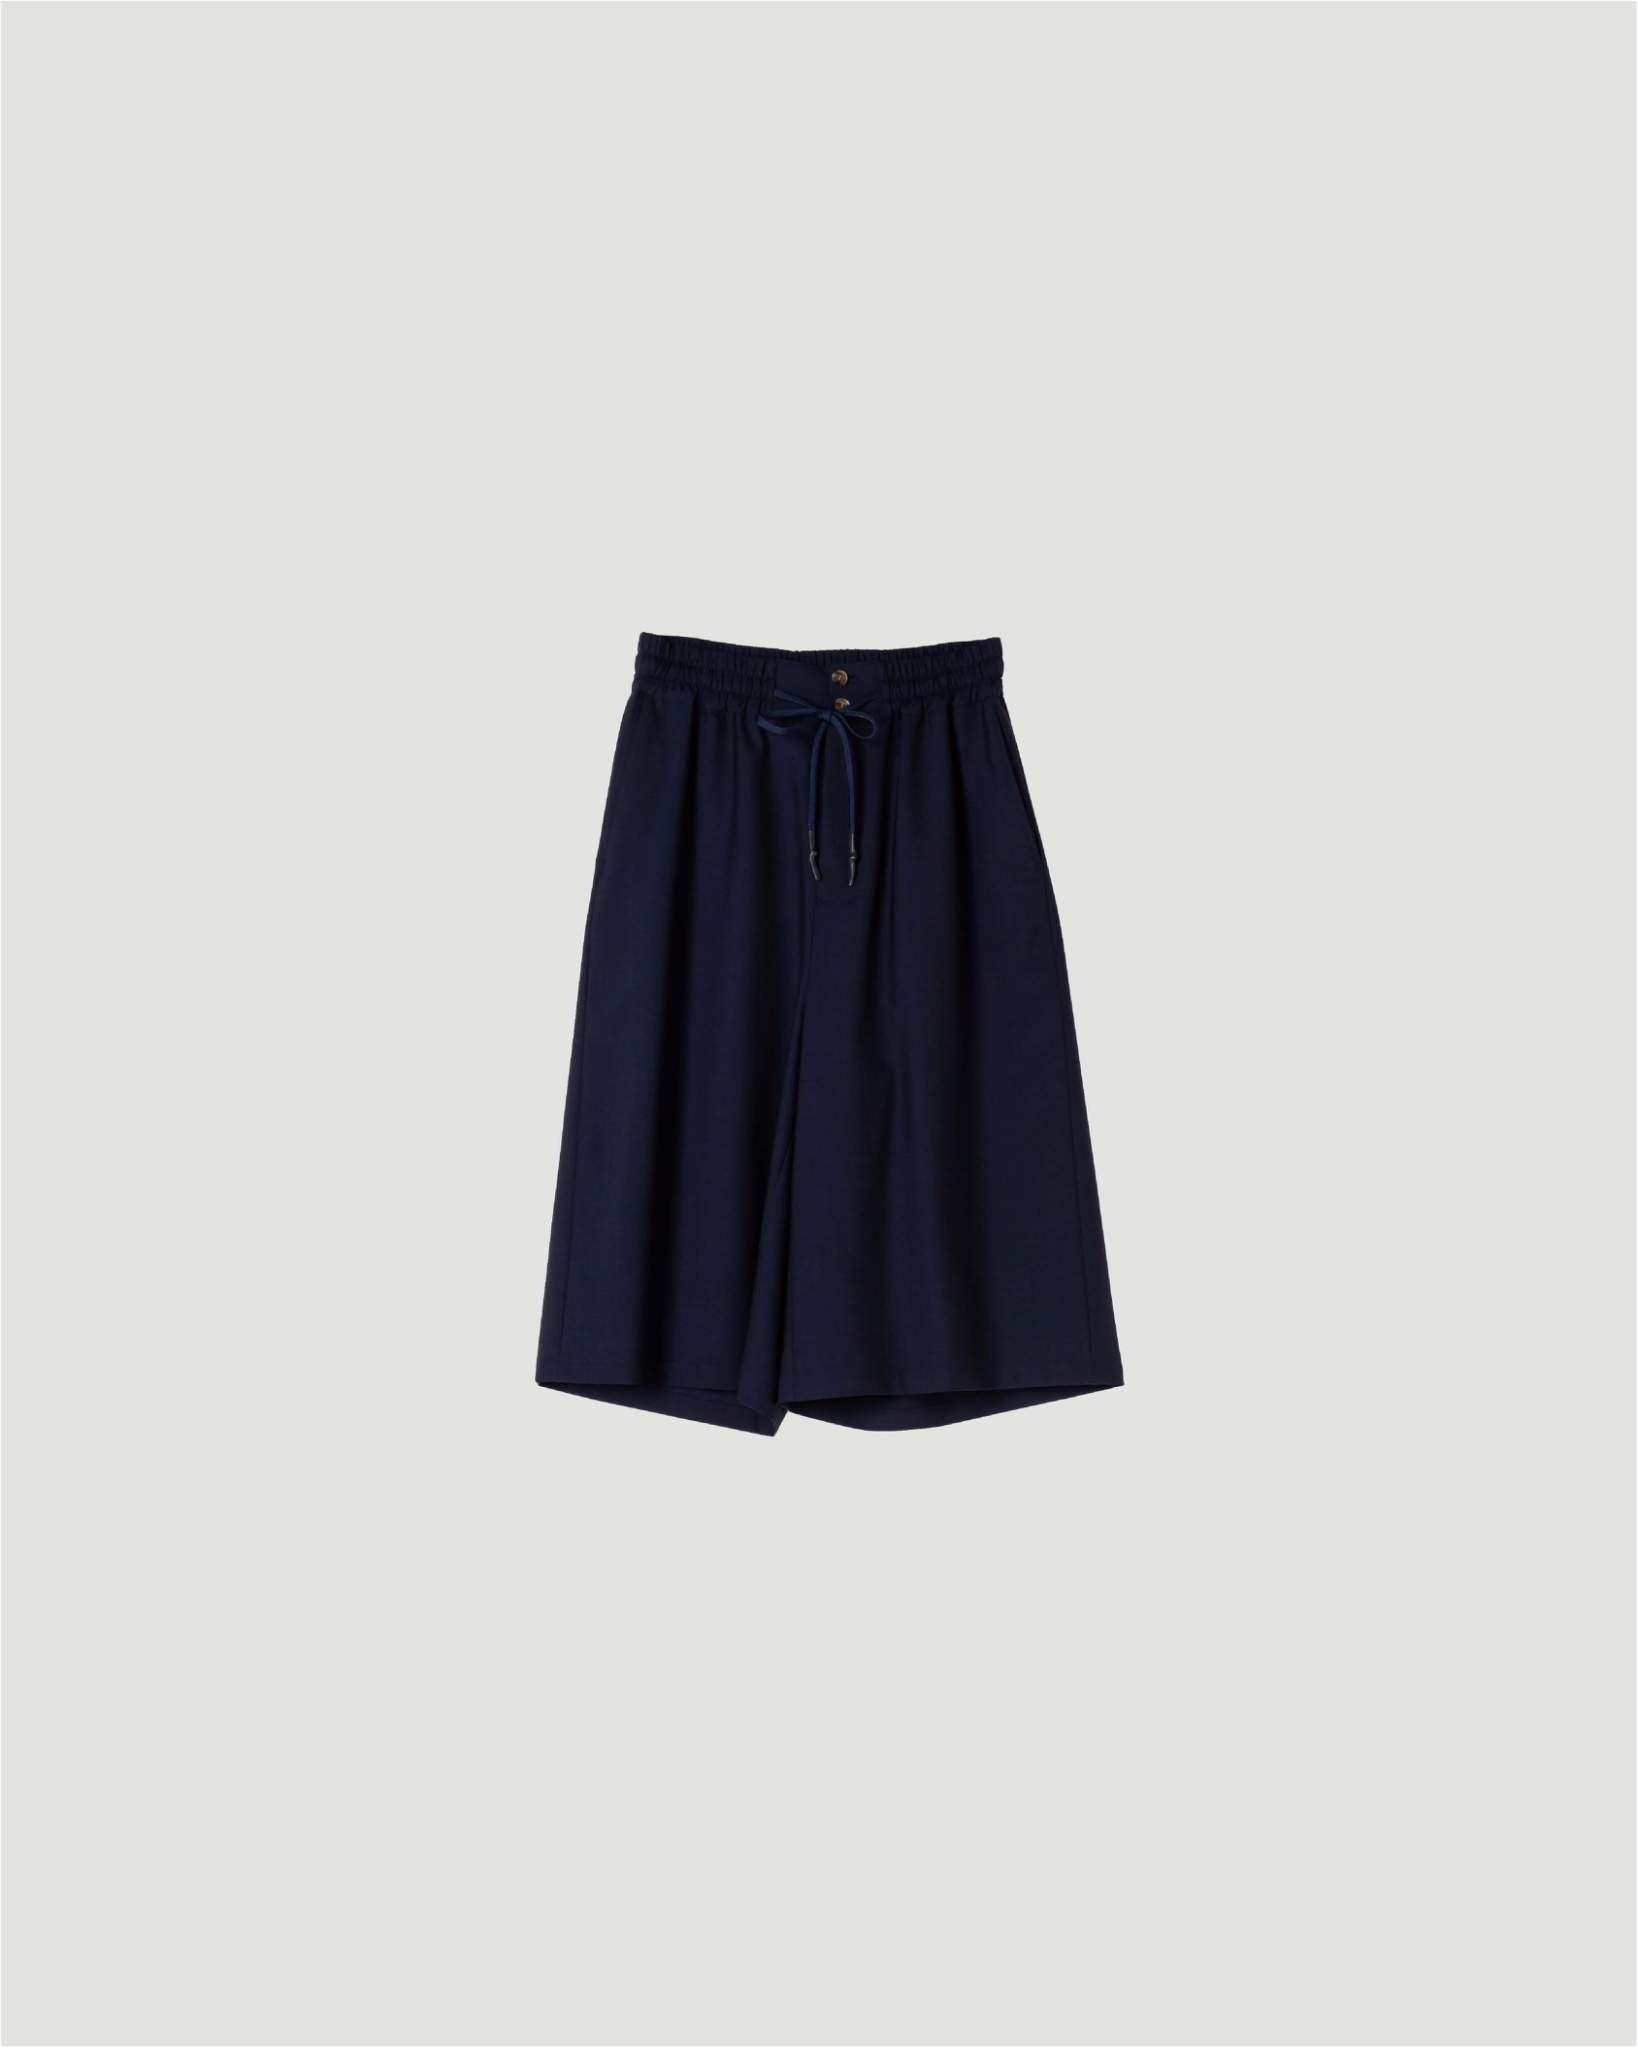 Super140 WOOL WIDE EASY 3/4 LENGTH SHORTS .06 [NAVY]